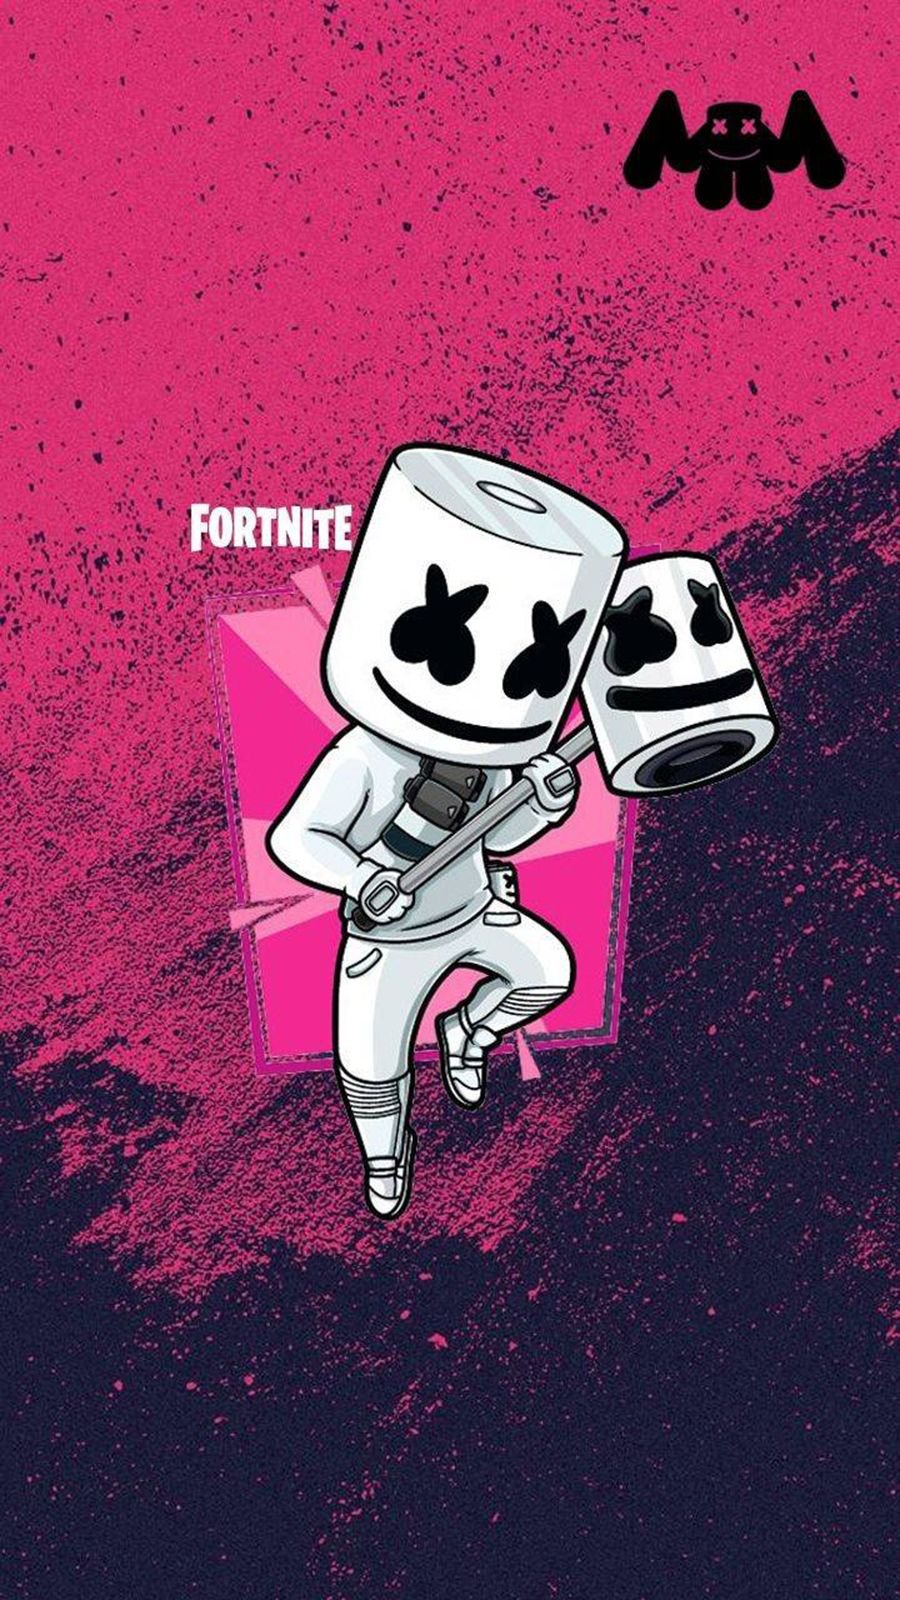 Sport Might World Cup Fortnite Boy Cup Fortnite Wallpaper